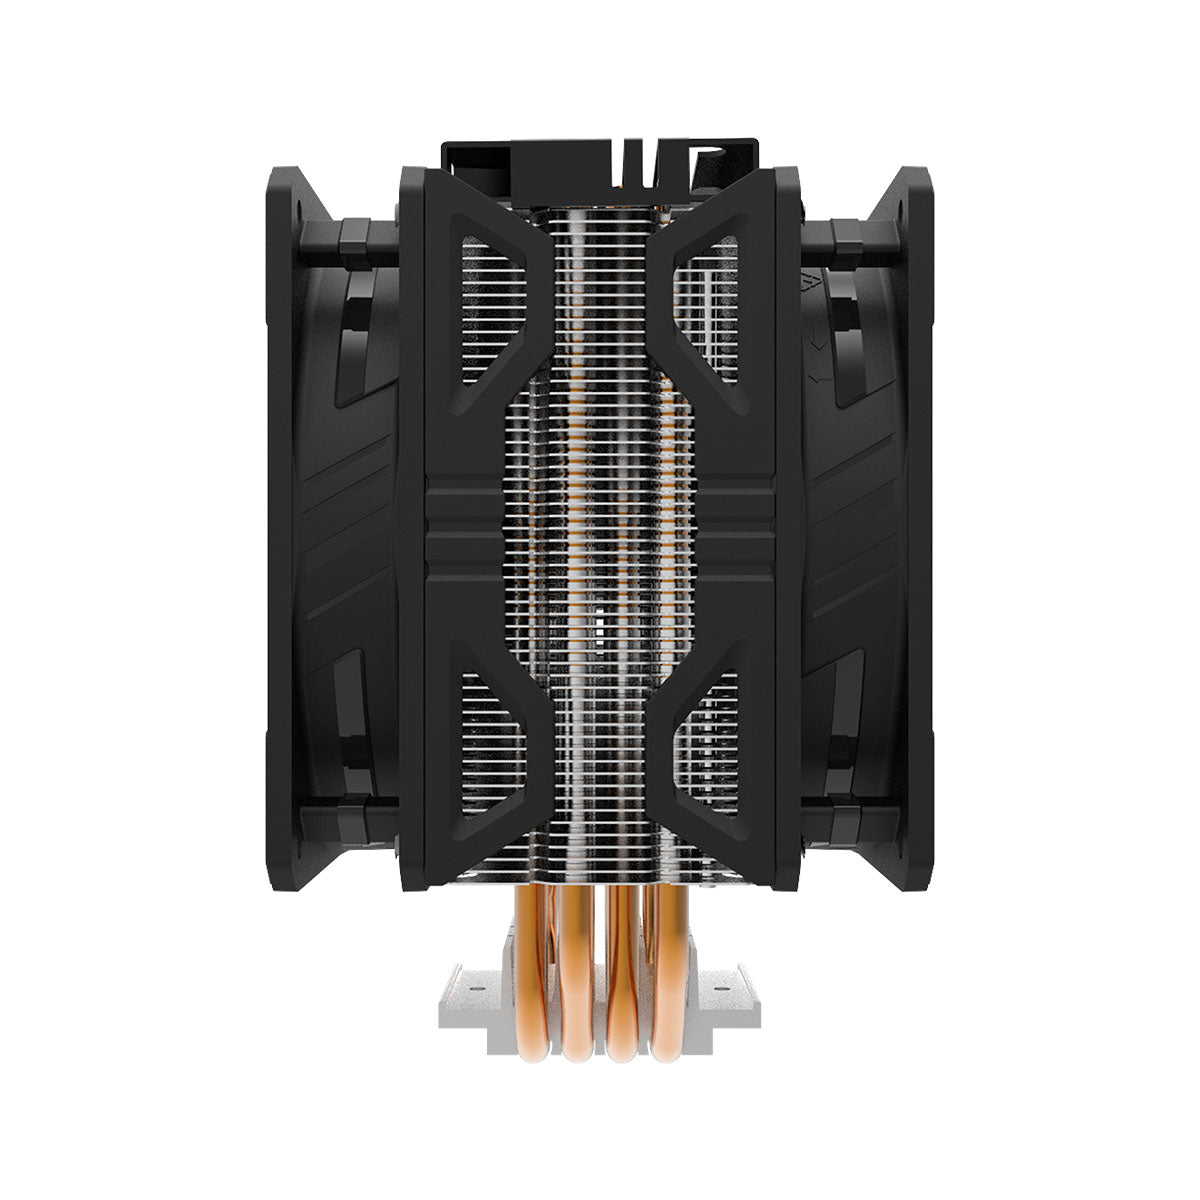 [RePacked] Cooler Master Hyper 212 LED Turbo ARGB CPU Air Cooler with Dual 120mm PWM Fan and Mini ARGB Controller